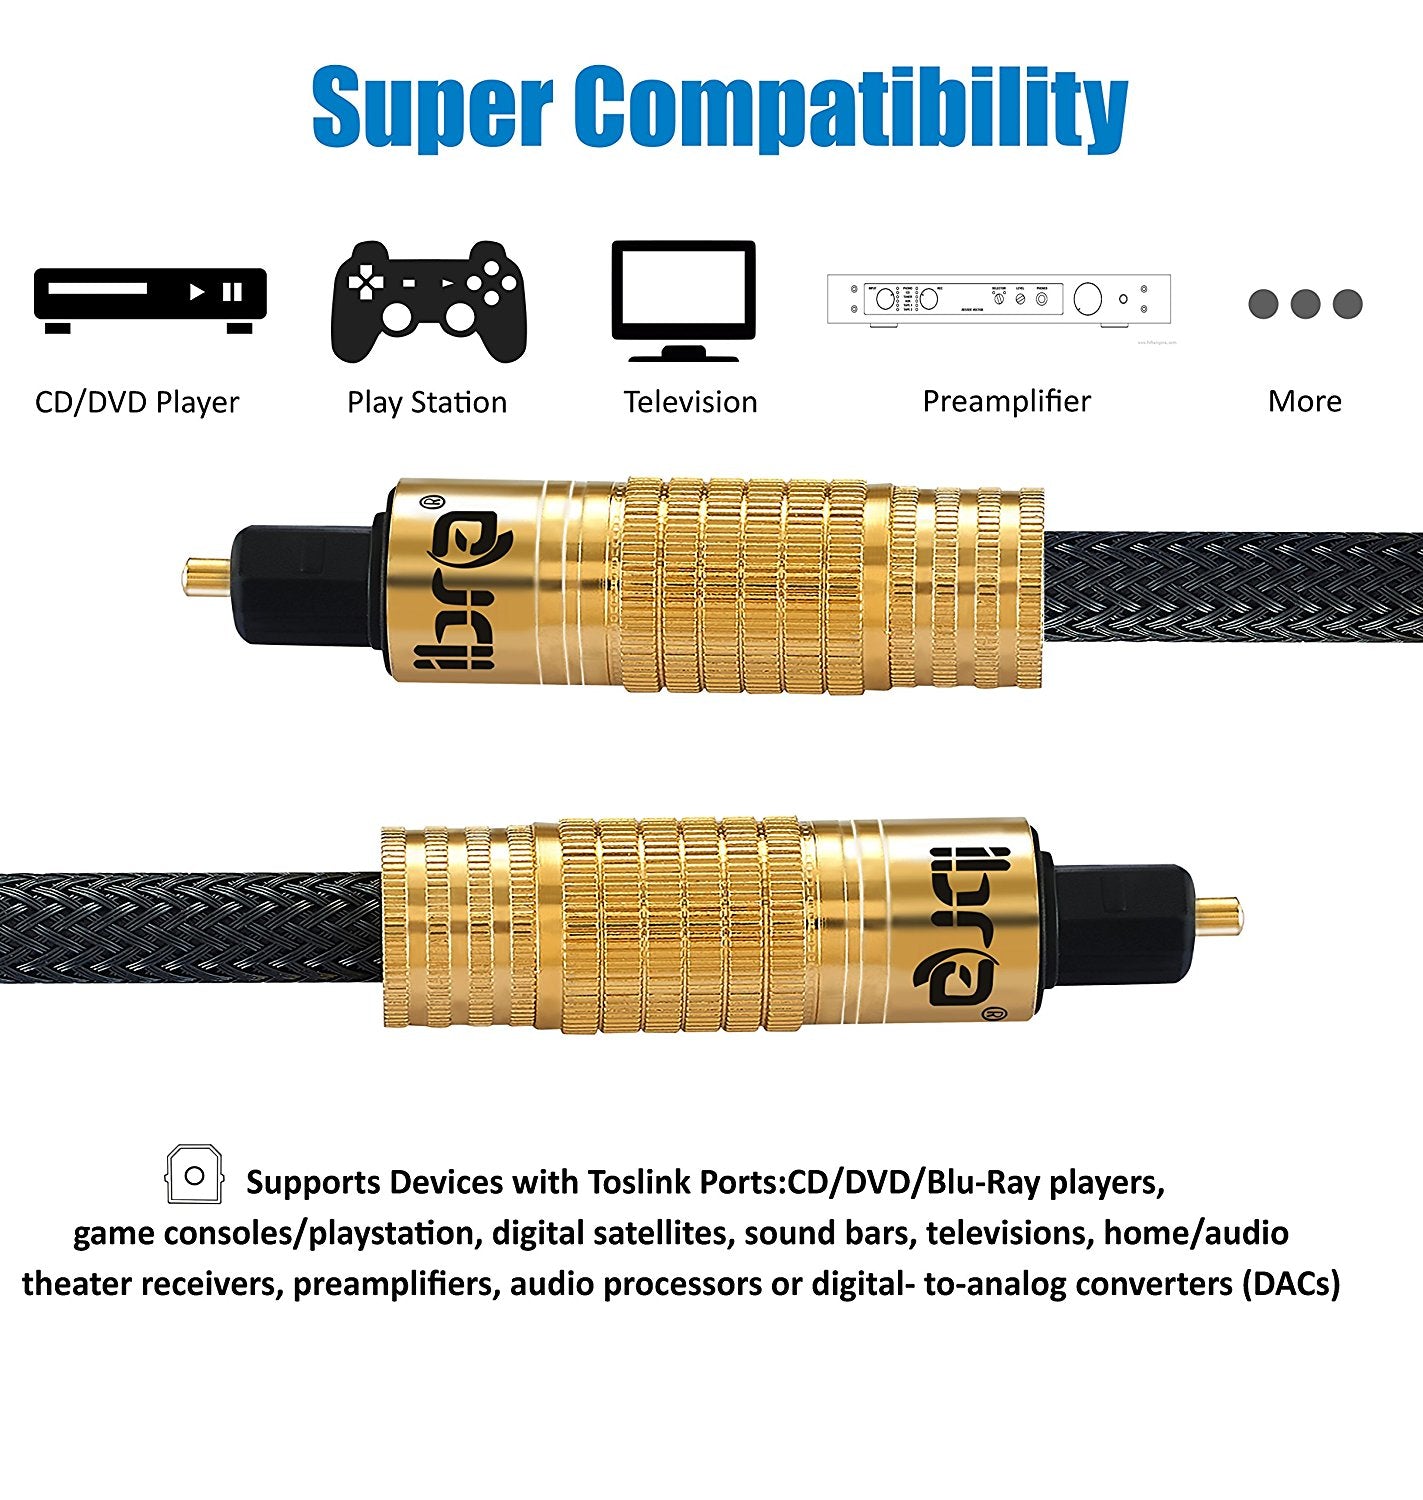 Optical Toslink Digital Audio Cable - Suitable for PS3,Sky,Sky HD,LCD,LED,Plasma, Blu Ray to Connect with Home Cinema Systems,AV Amps - 10M - IBRA PREMIUM BLACK